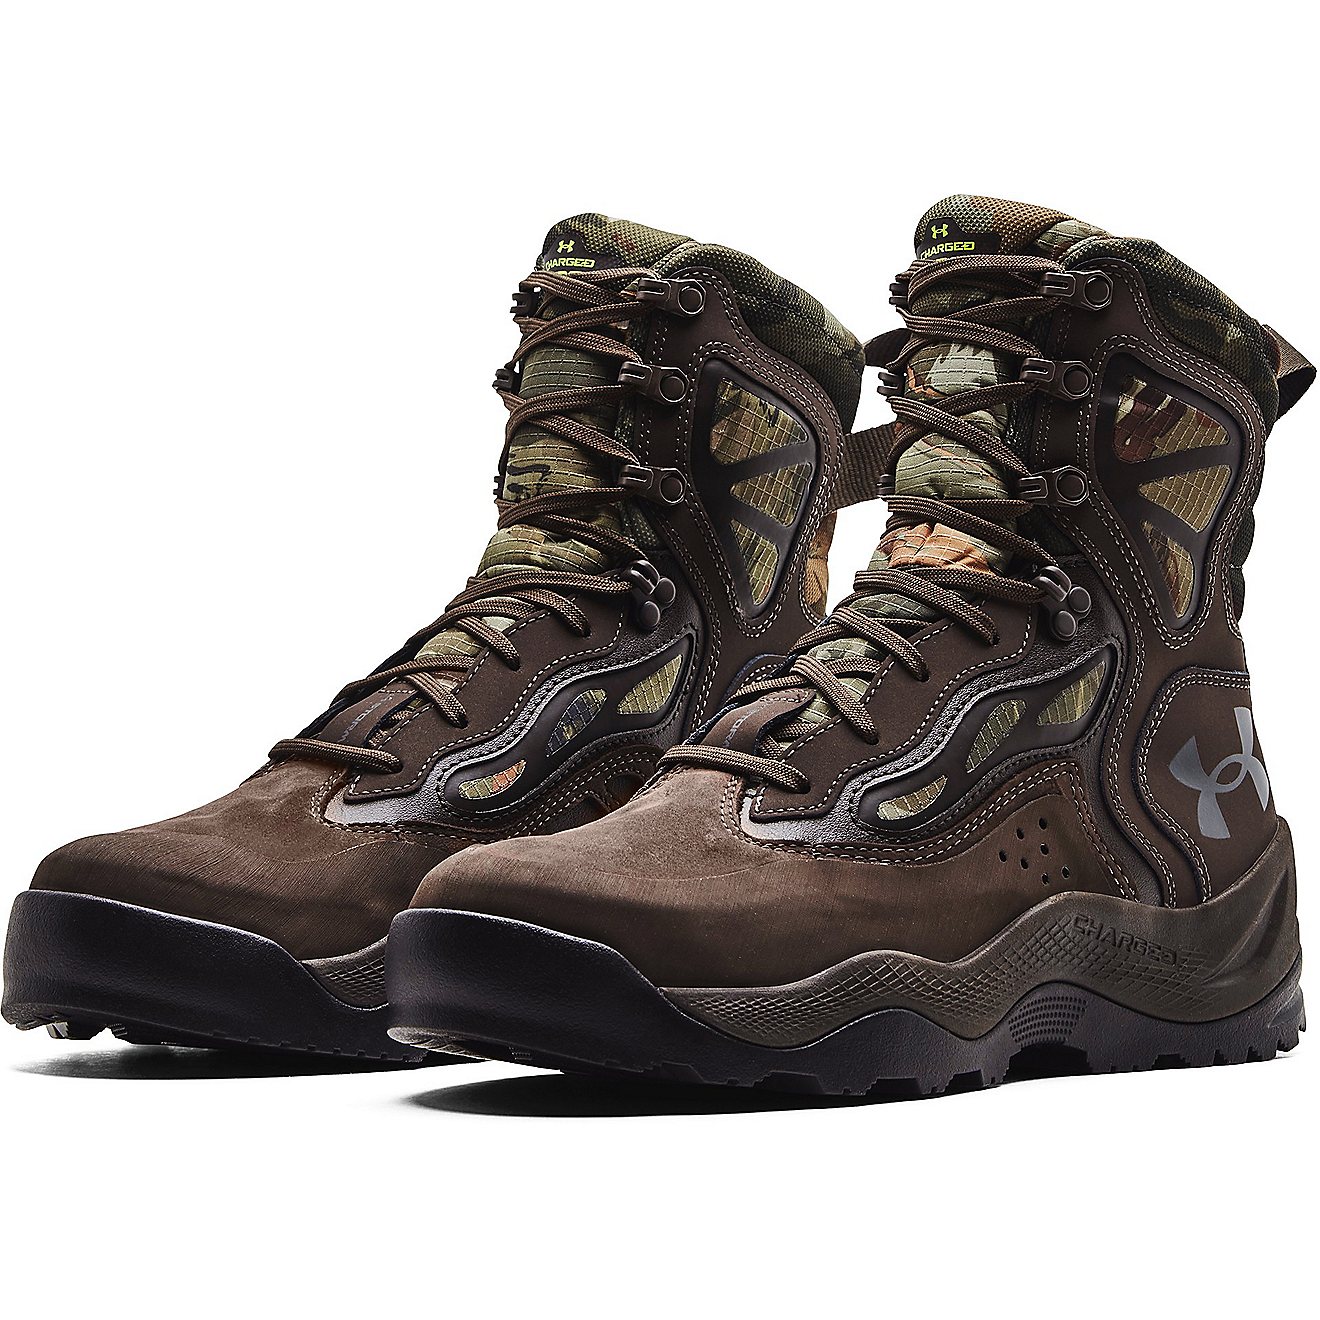 Under Armour Men's Charged Raider Waterproof Hiking Boots                                                                        - view number 2